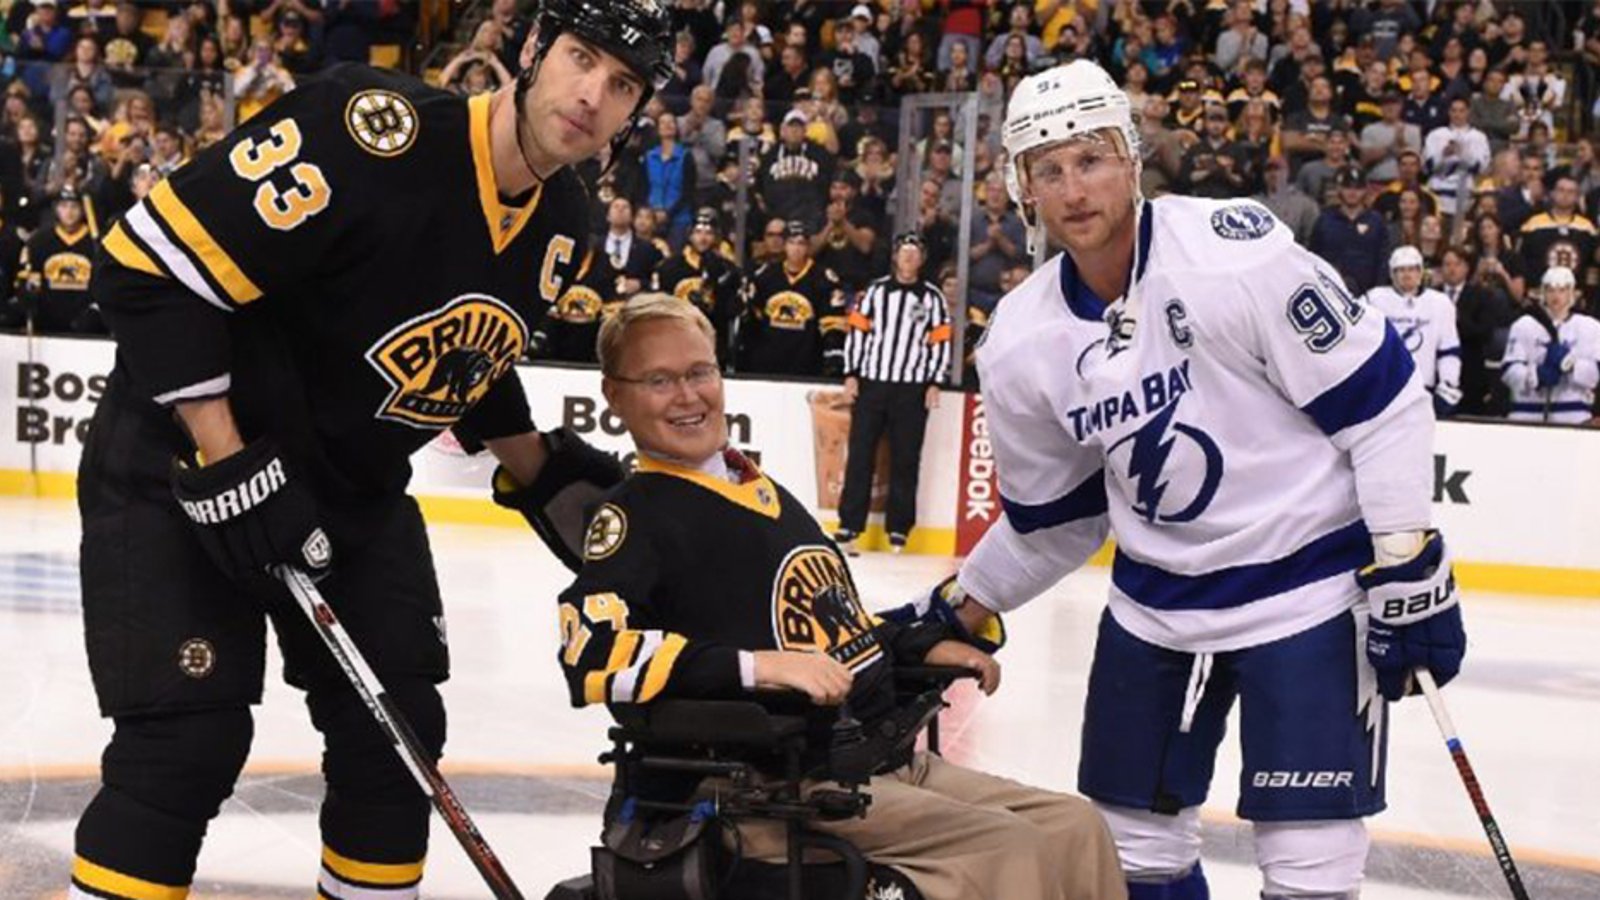 Travis Roy, hockey player who was paralyzed on the ice, passes away at 45